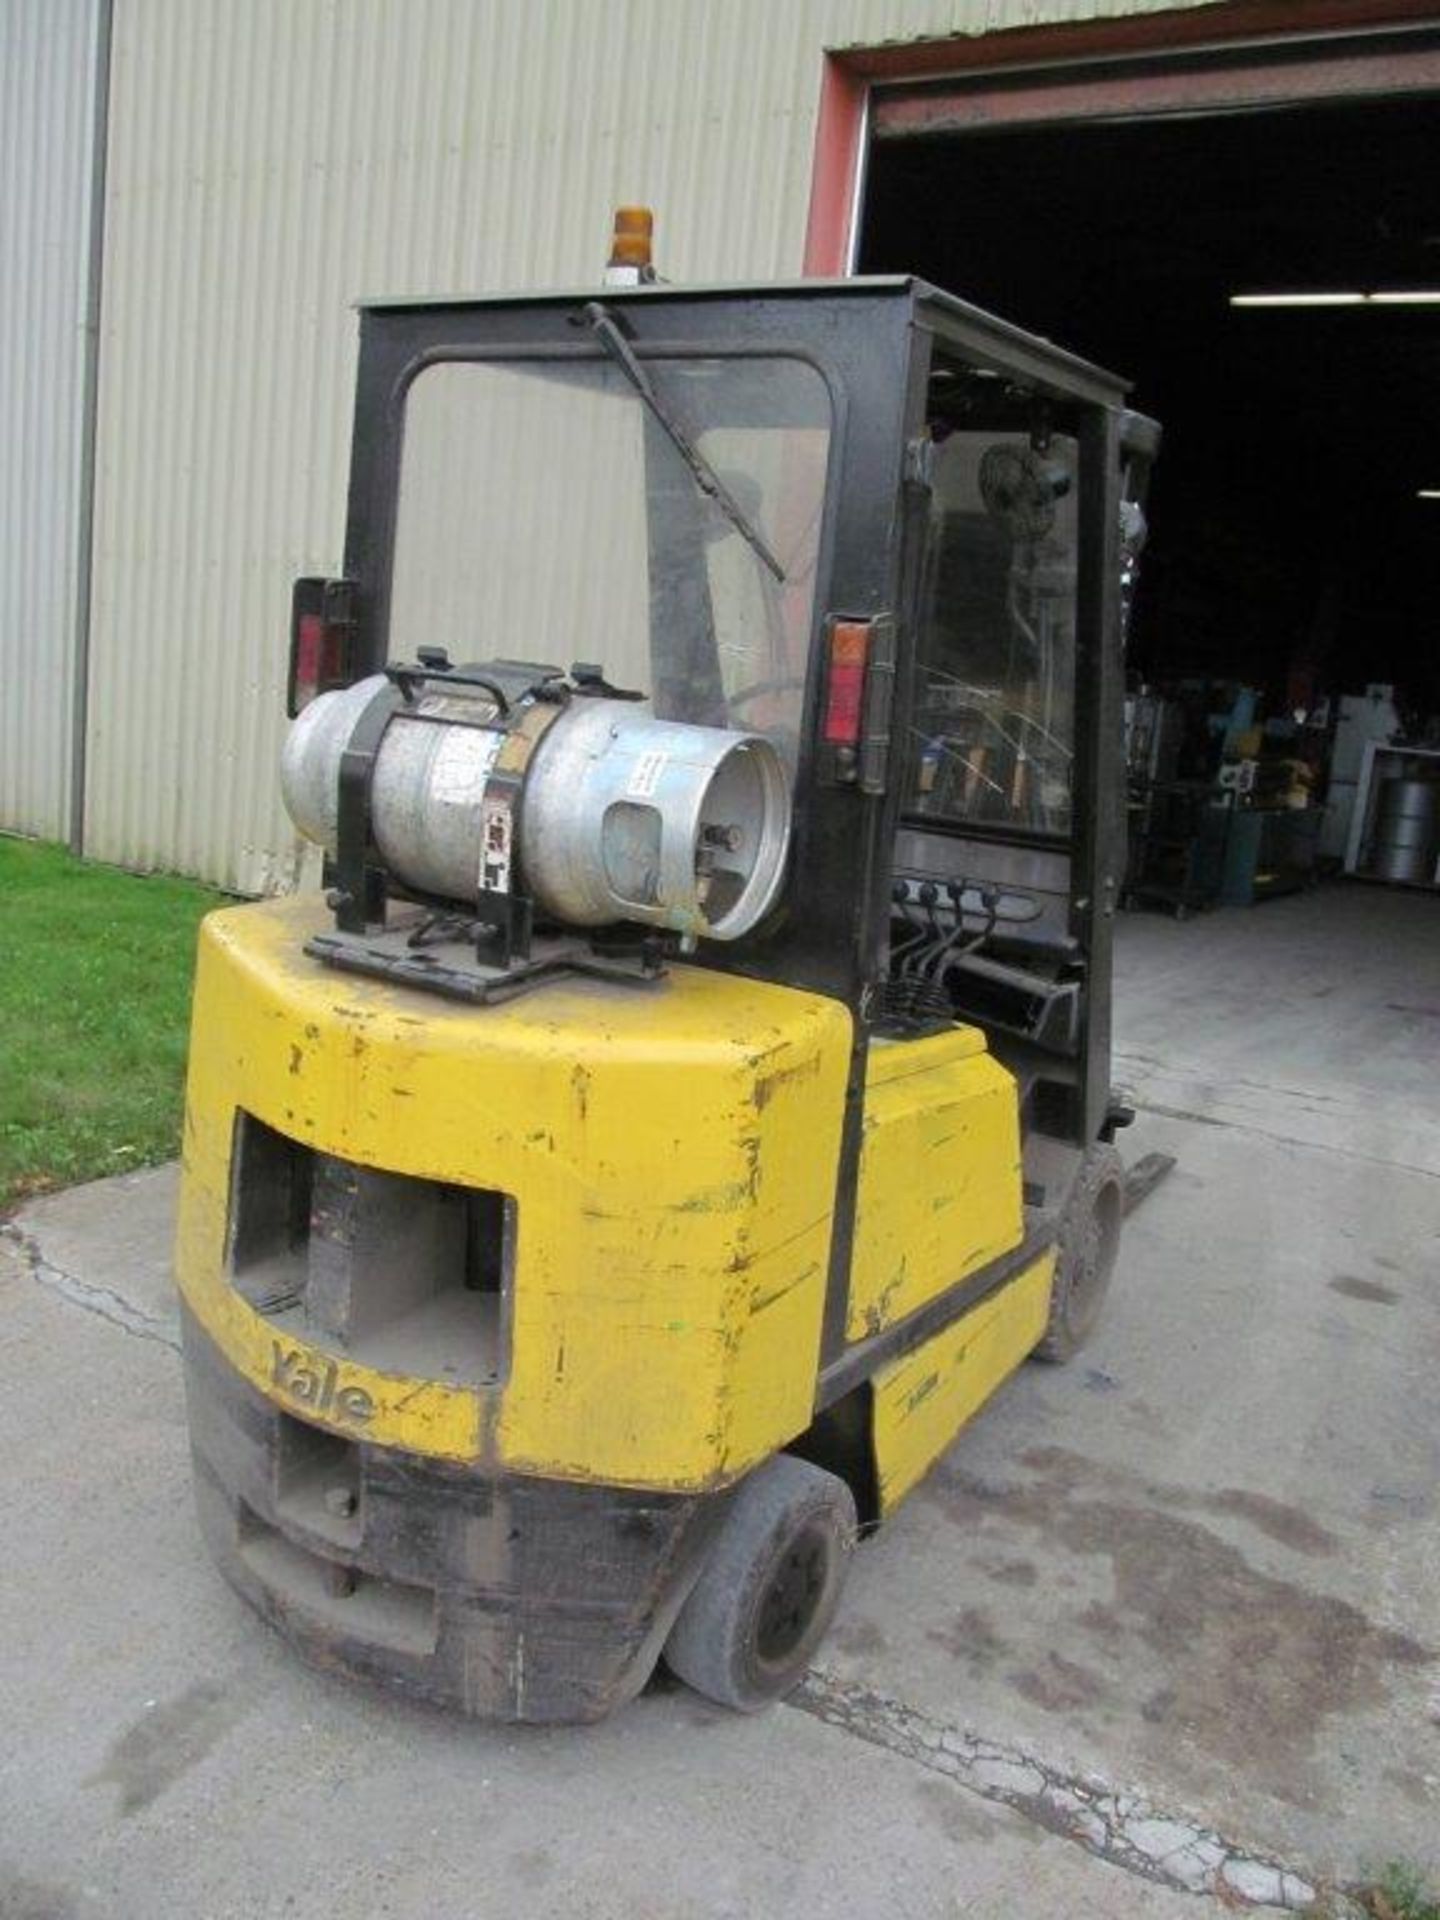 YALE PROPANE FORKLIFT MODEL: E466087, 5000 LBS CAP, INDOOR/OUTDOOR, "PROPANE TANK NOT INCLUDED" - Image 4 of 10